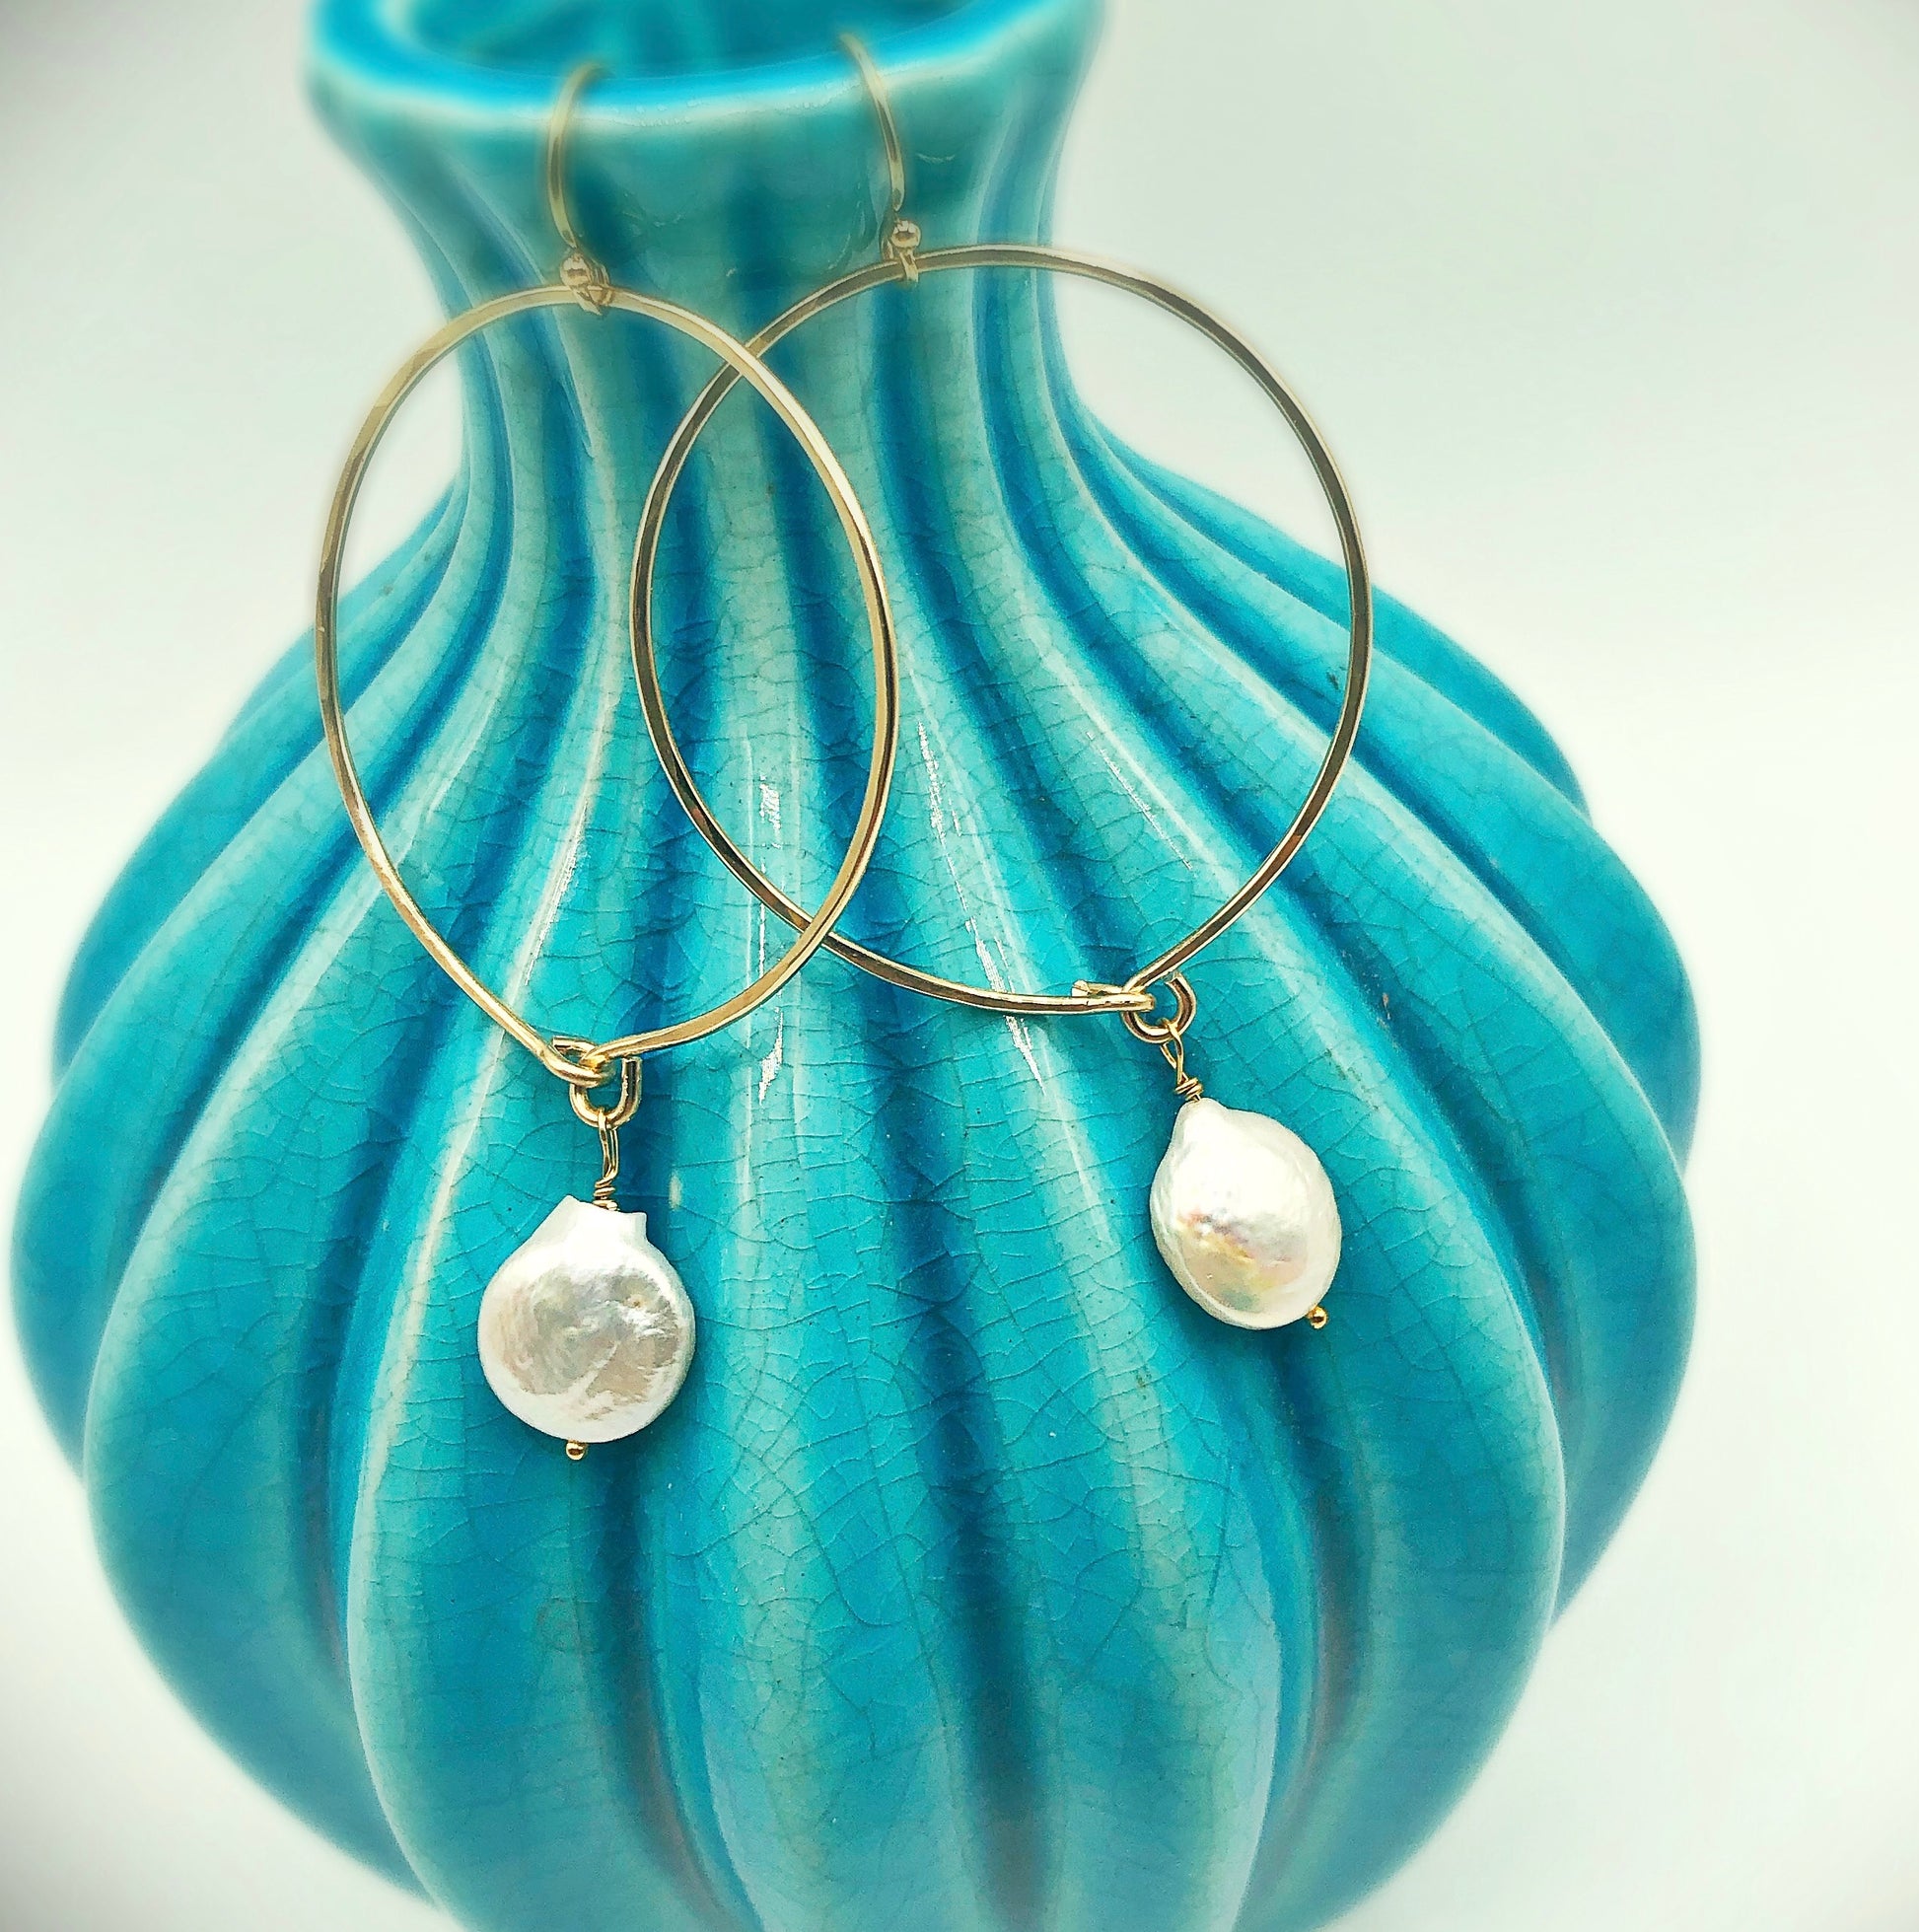 Capitola Pearl Hoops - Blue Sky Feathers